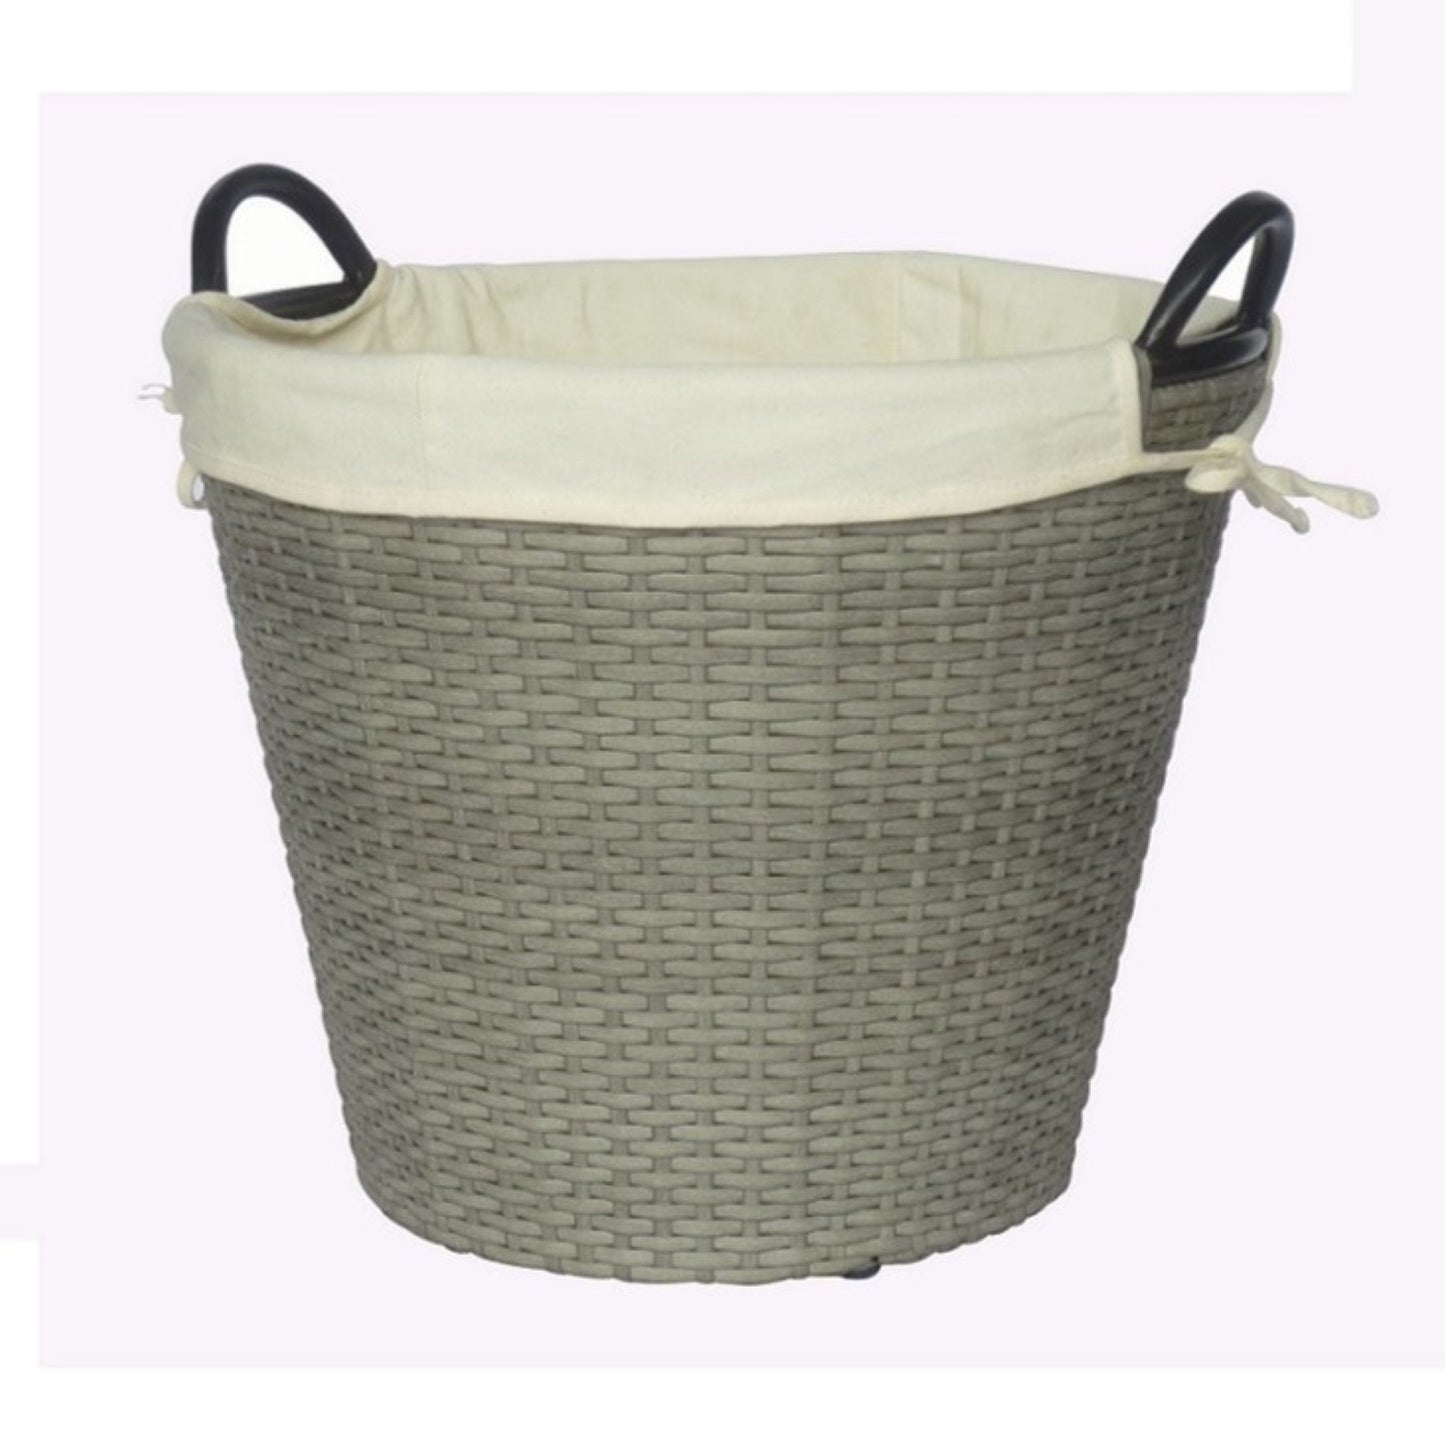 PAPUA Poly Rattan Wicker Large Basket with Fabric Lining - Grey - Direct Factory Furniture Australia